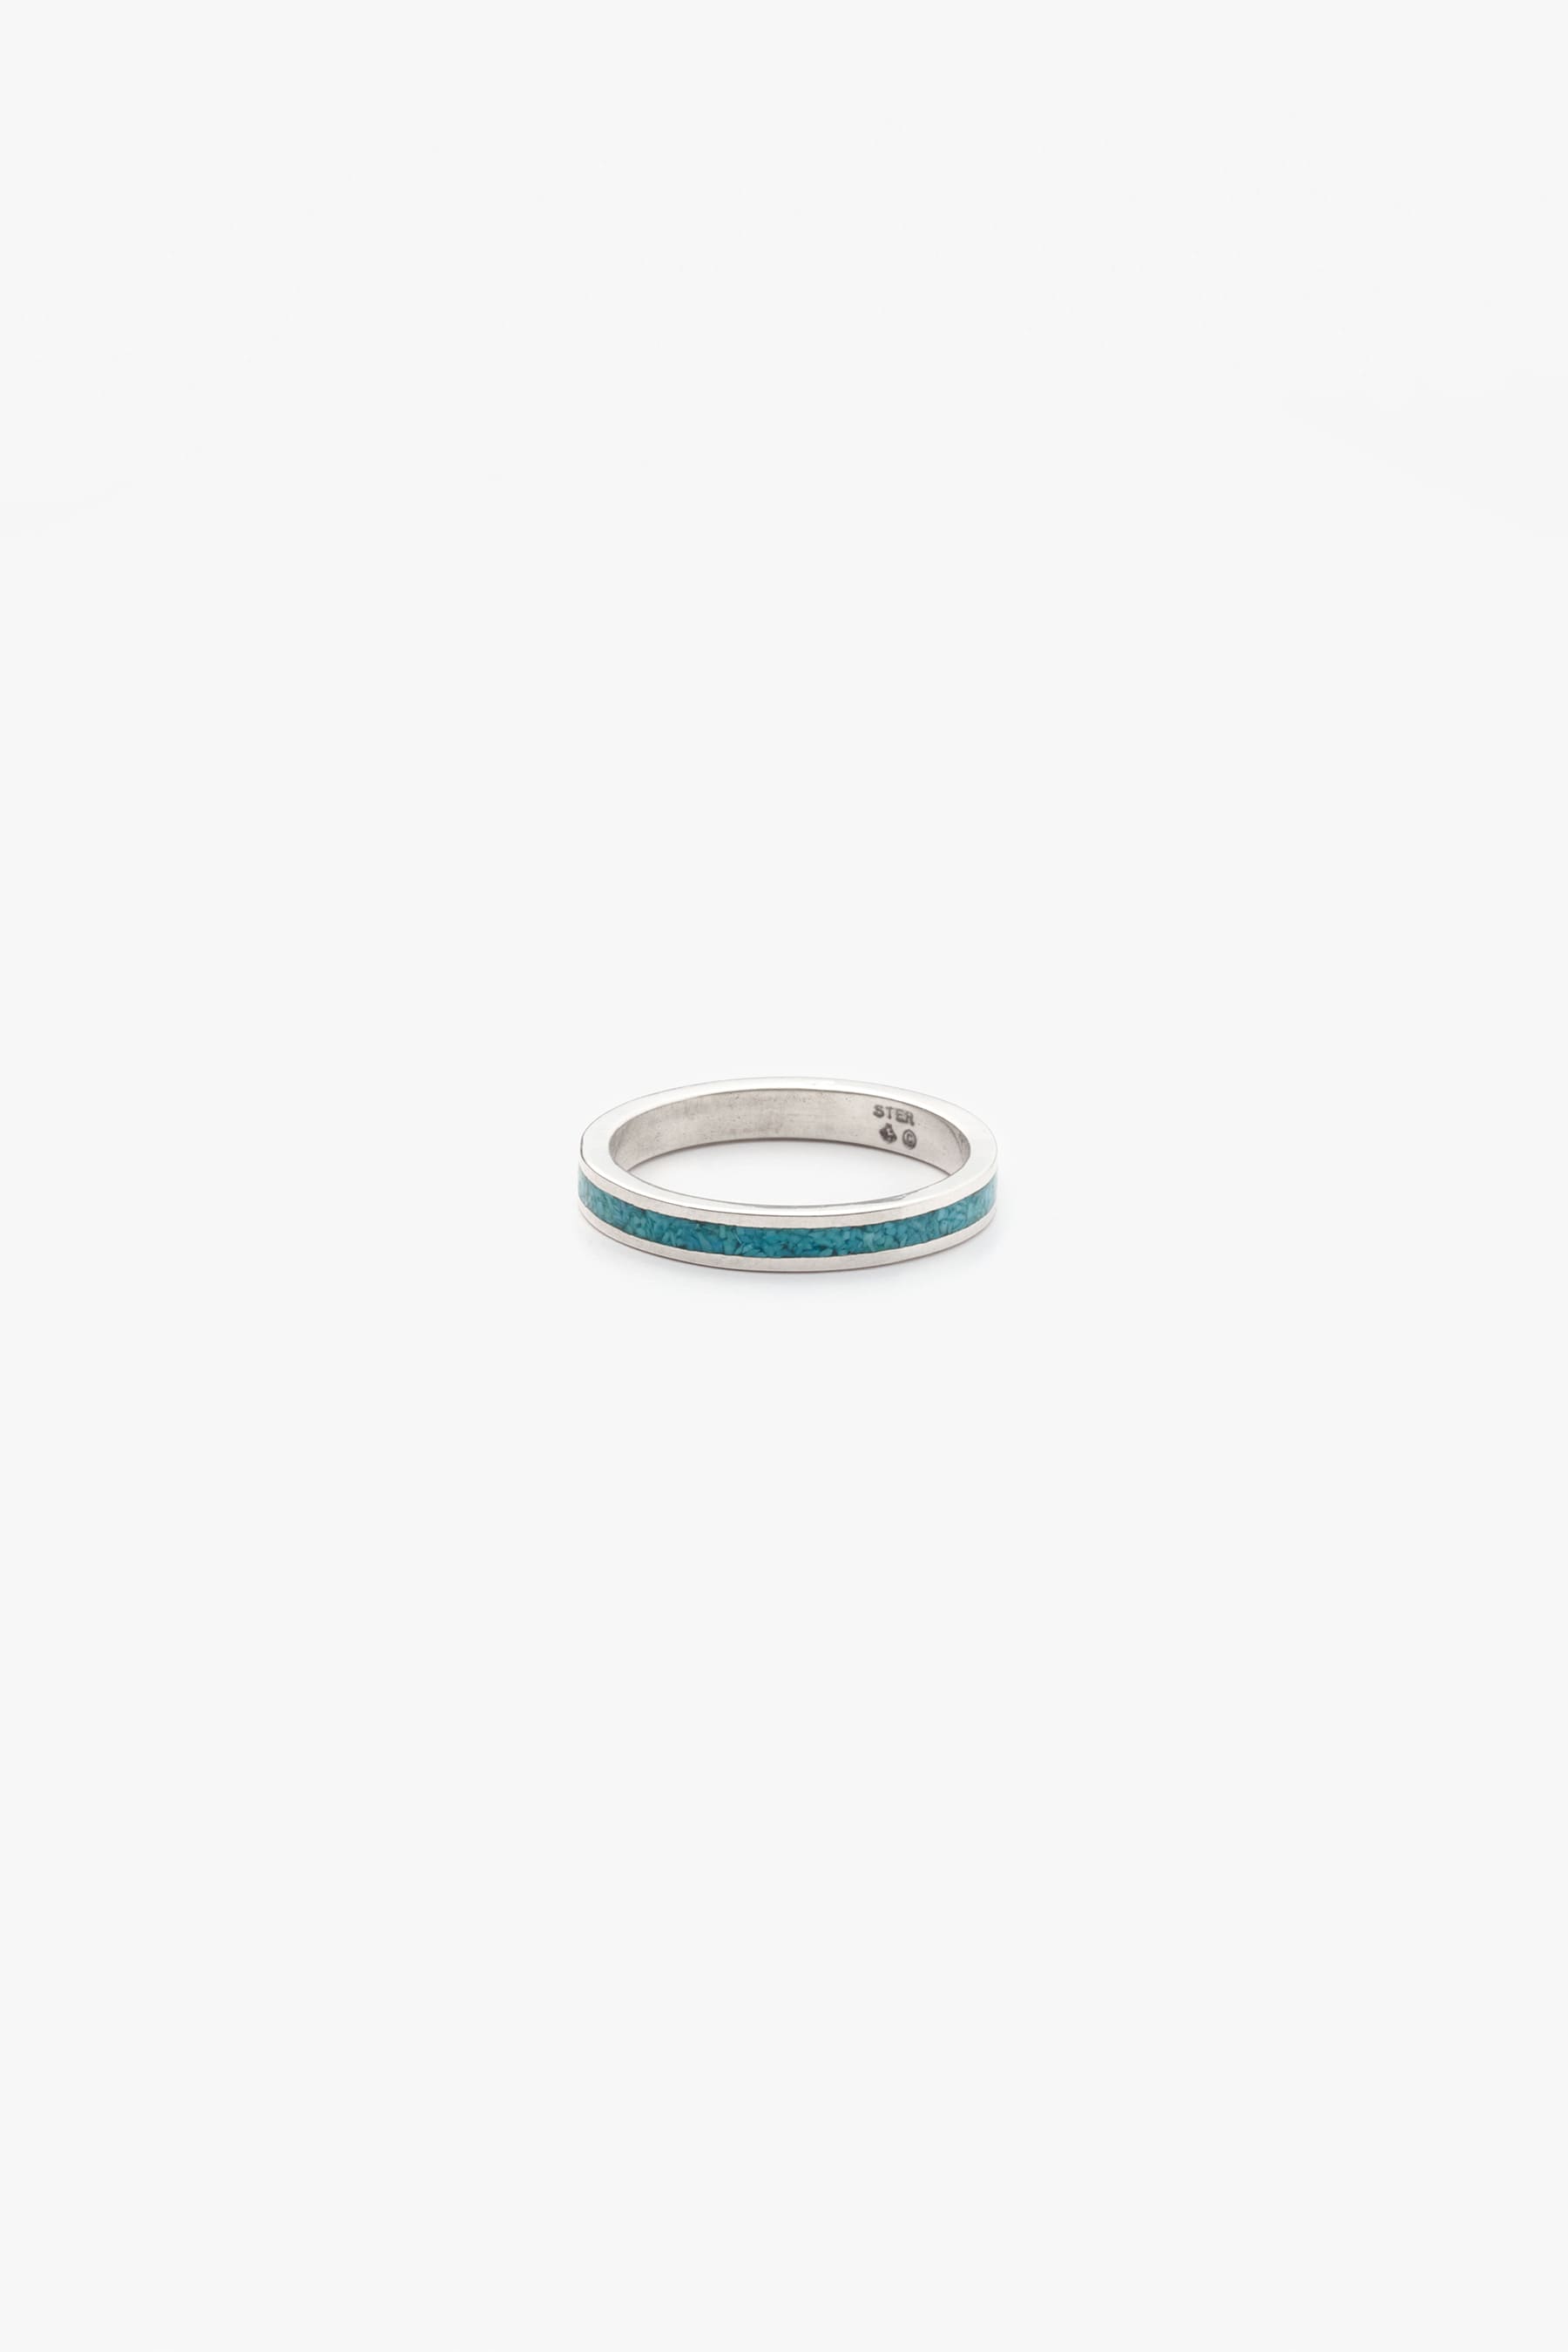 TURQUOISE R730 RING